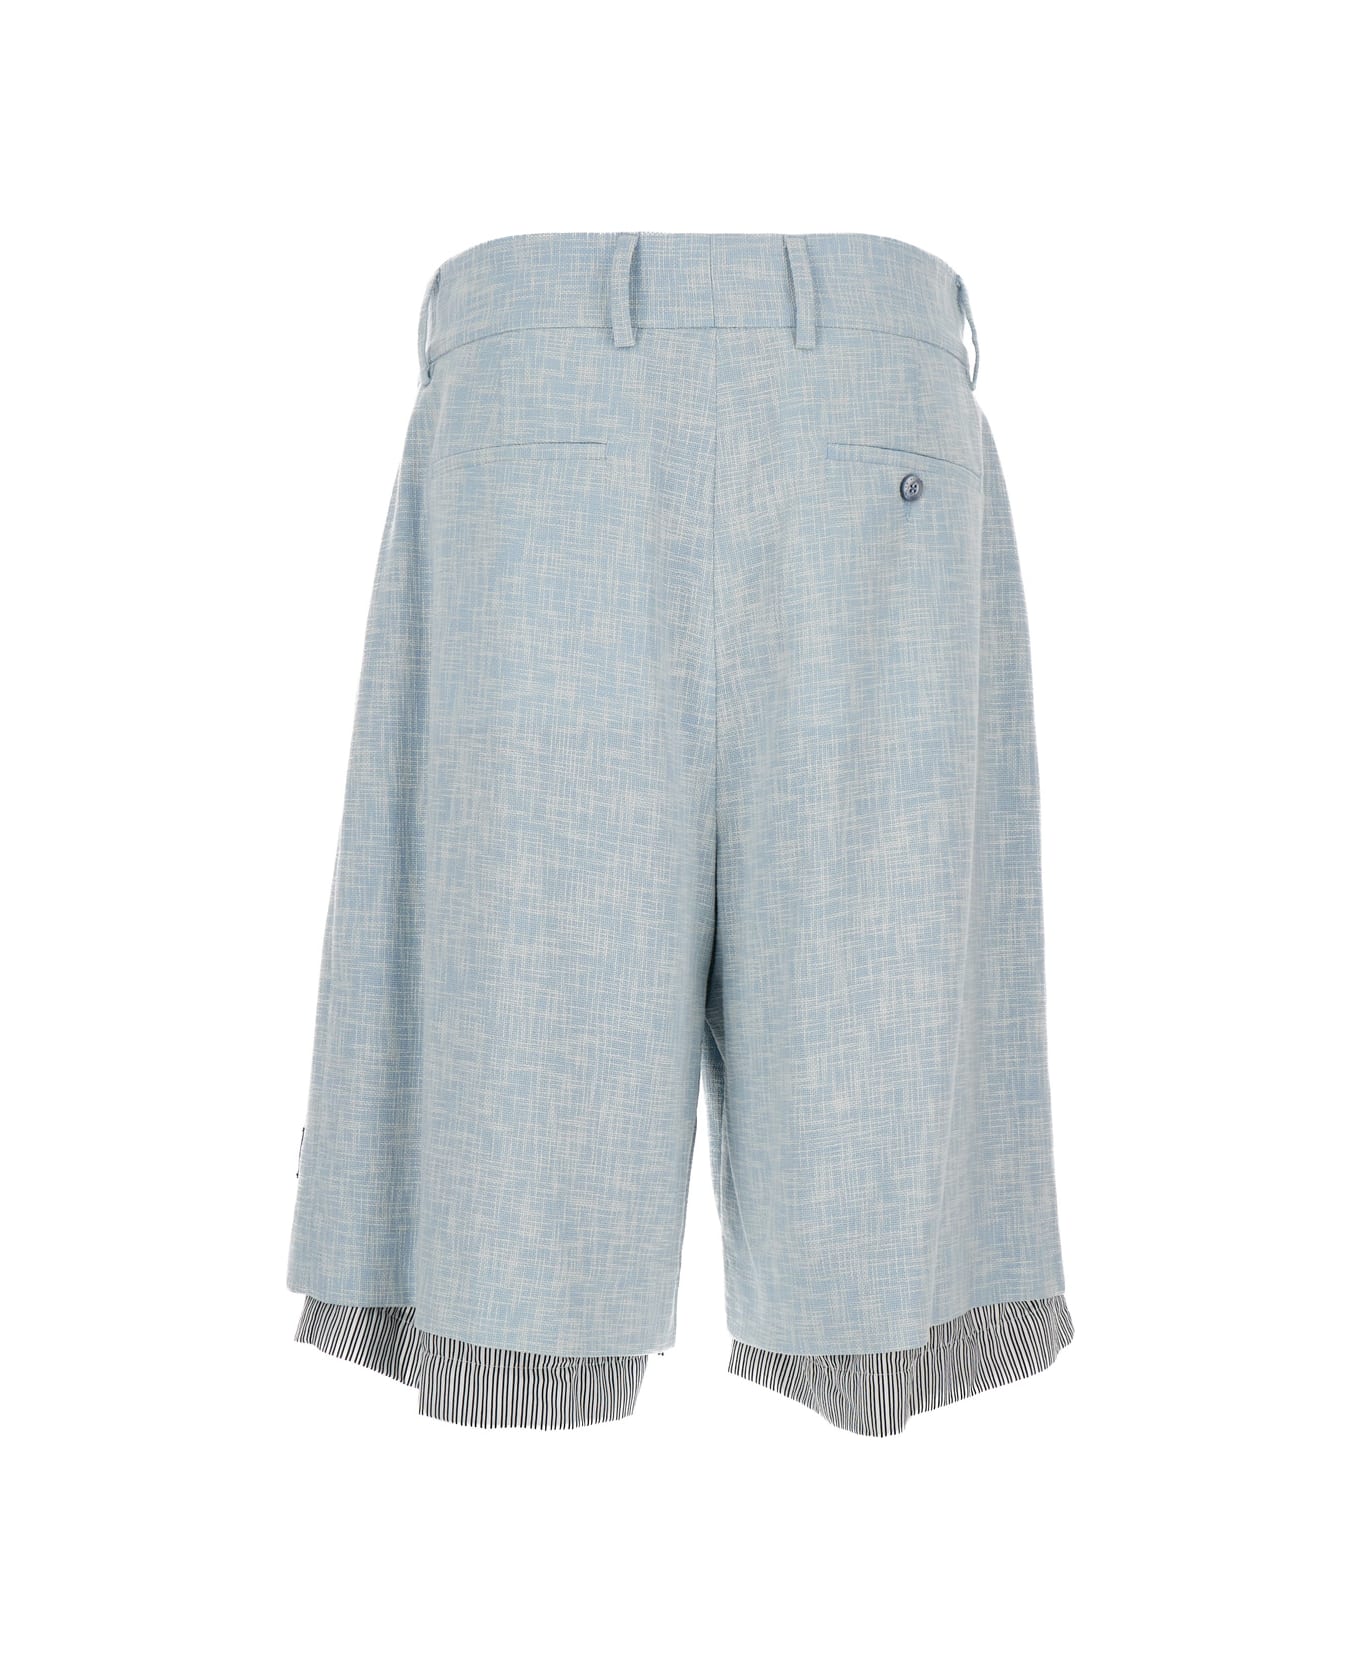 AMIRI Light Blue Layered Bermuda Shorts With Logo Patch In Wool And Cotton Man - Light blue